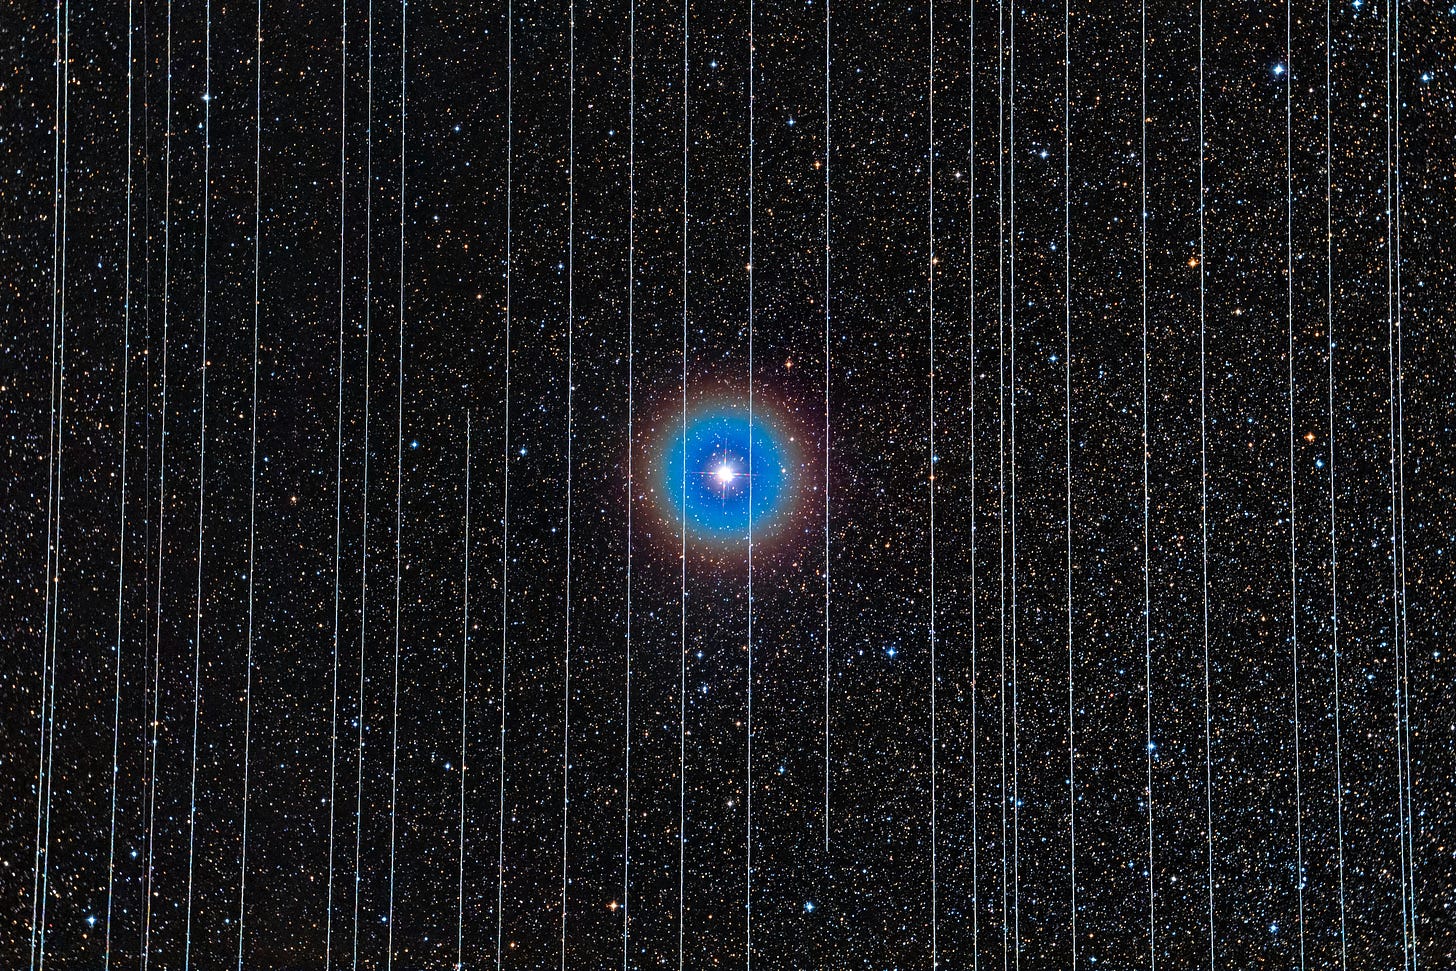 A long exposure photograph of a dark sky centered on the double star Albireo, appearing large and bright while surrounded by smaller, more distant stars. Several white lines run vertically across the whole frame.